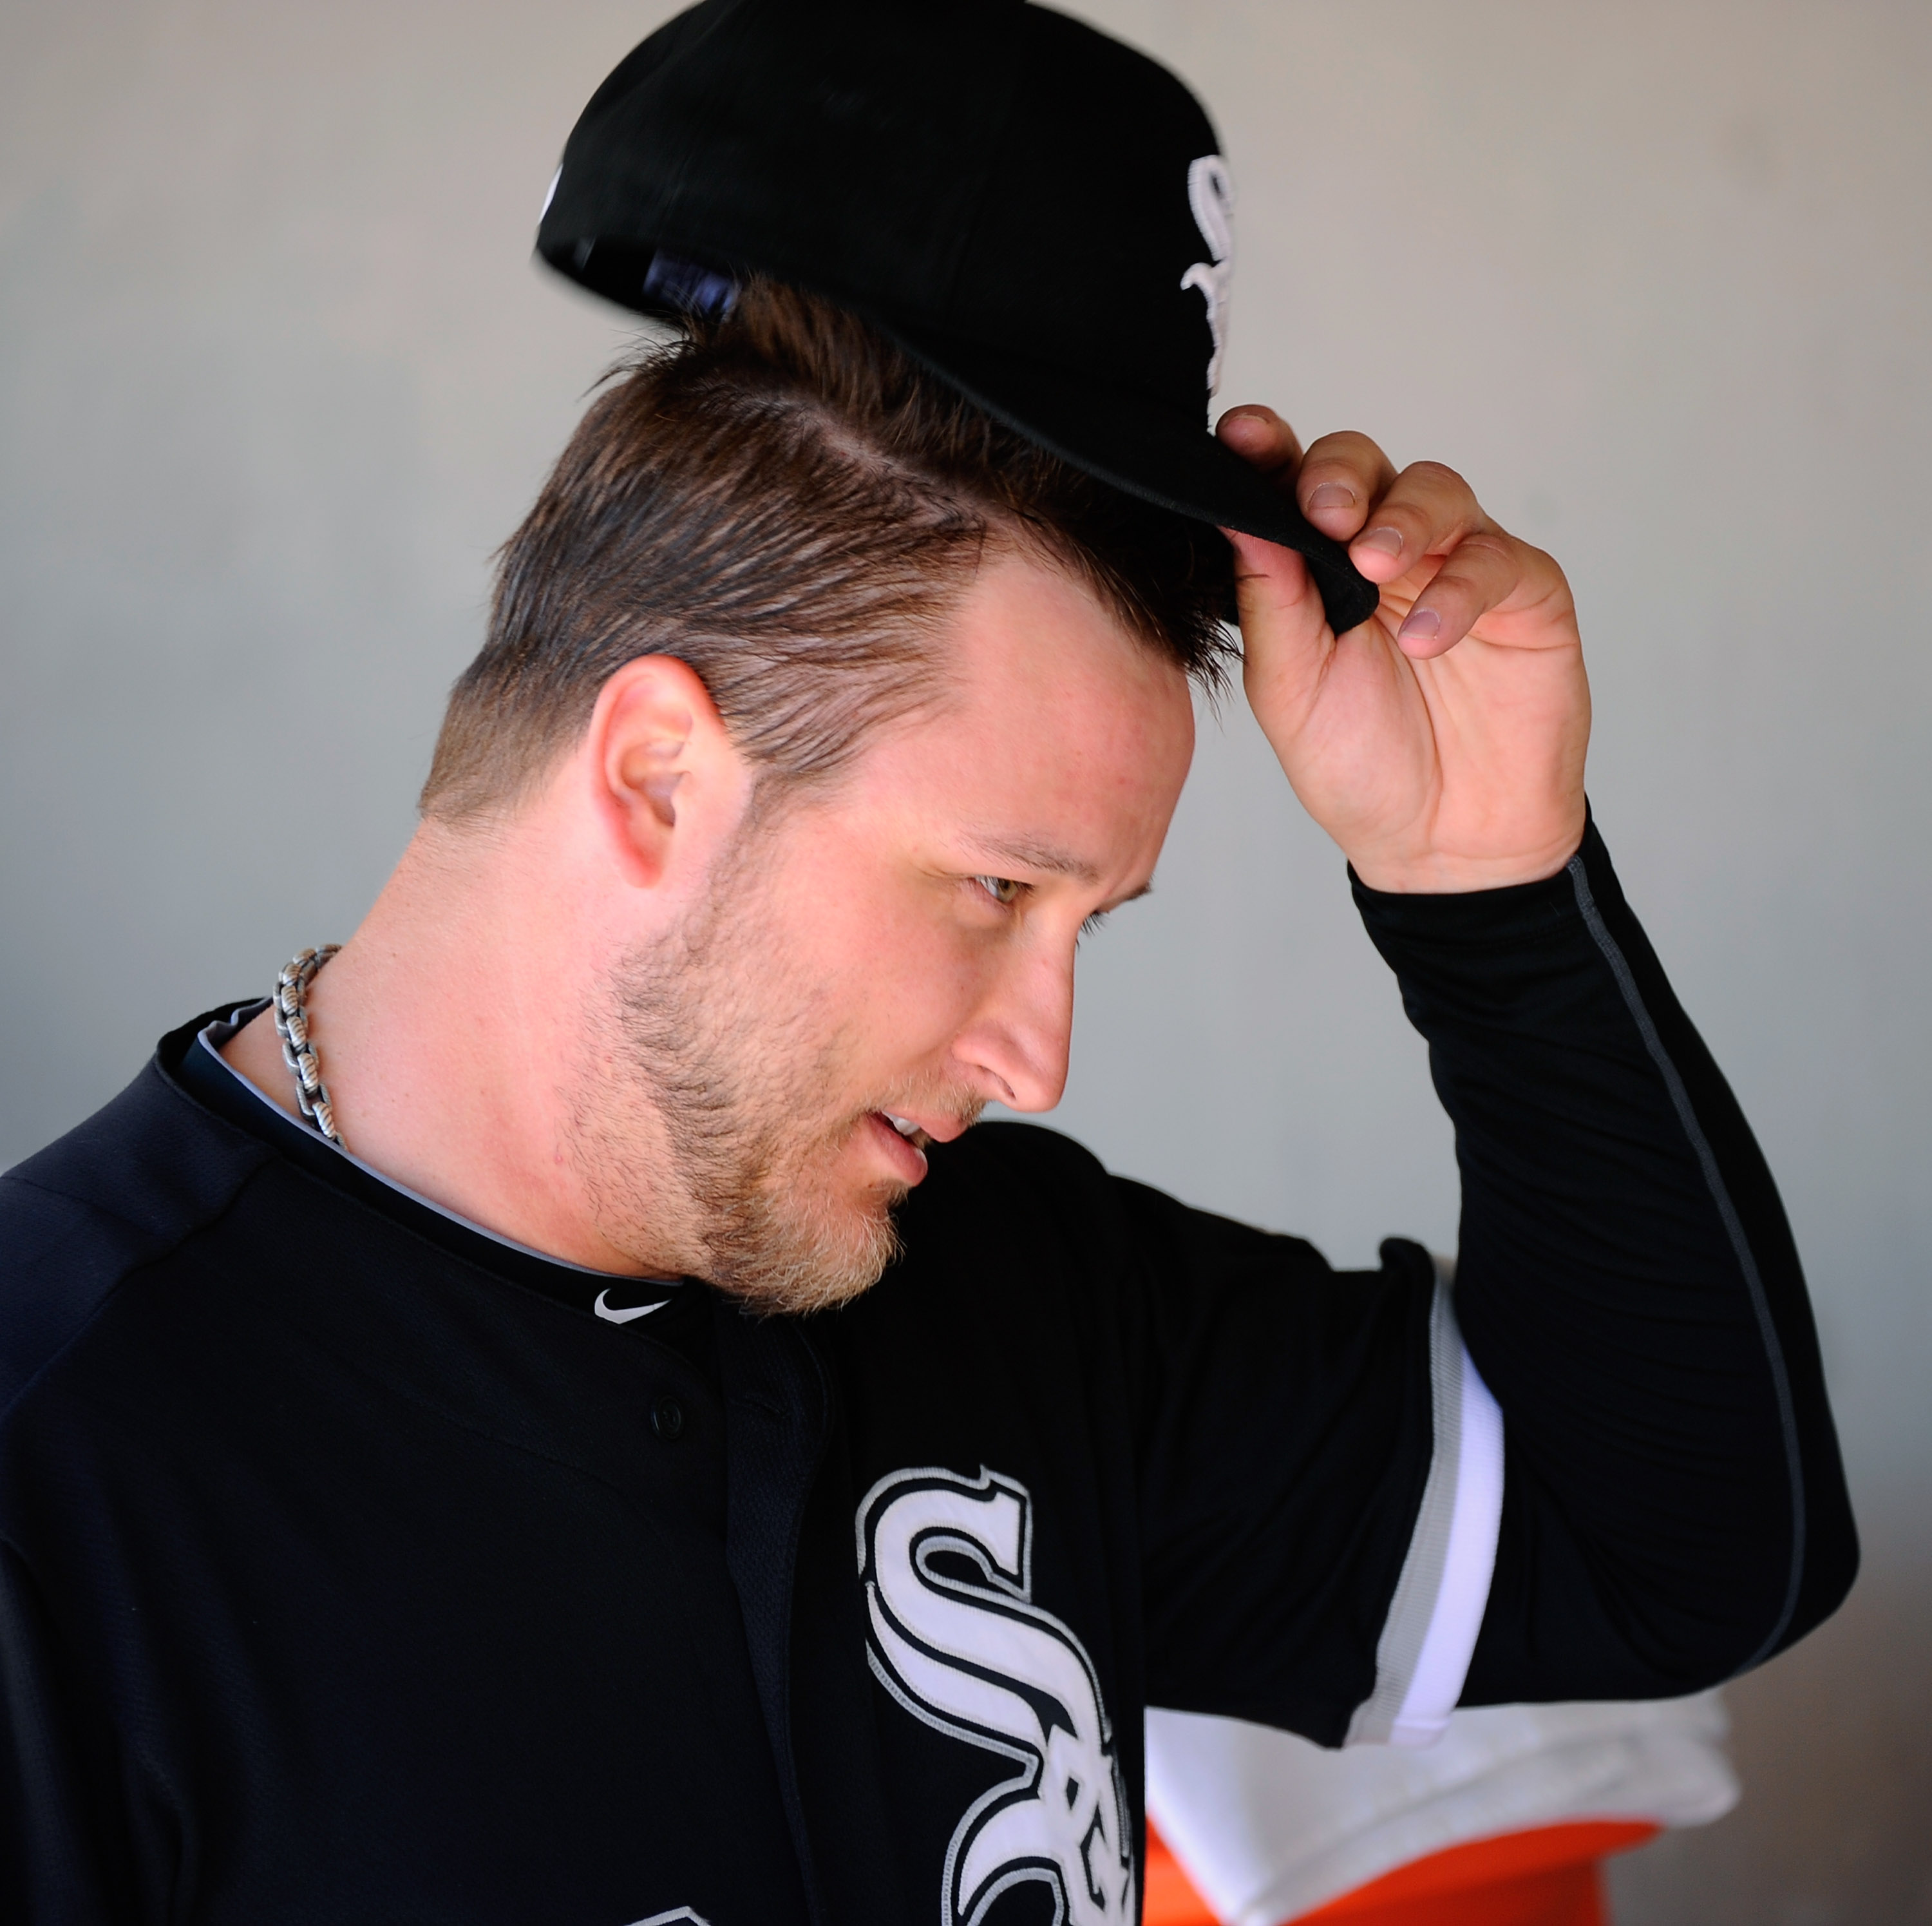 Cubs unlikely to make strong bid for Buehrle – Sun Sentinel